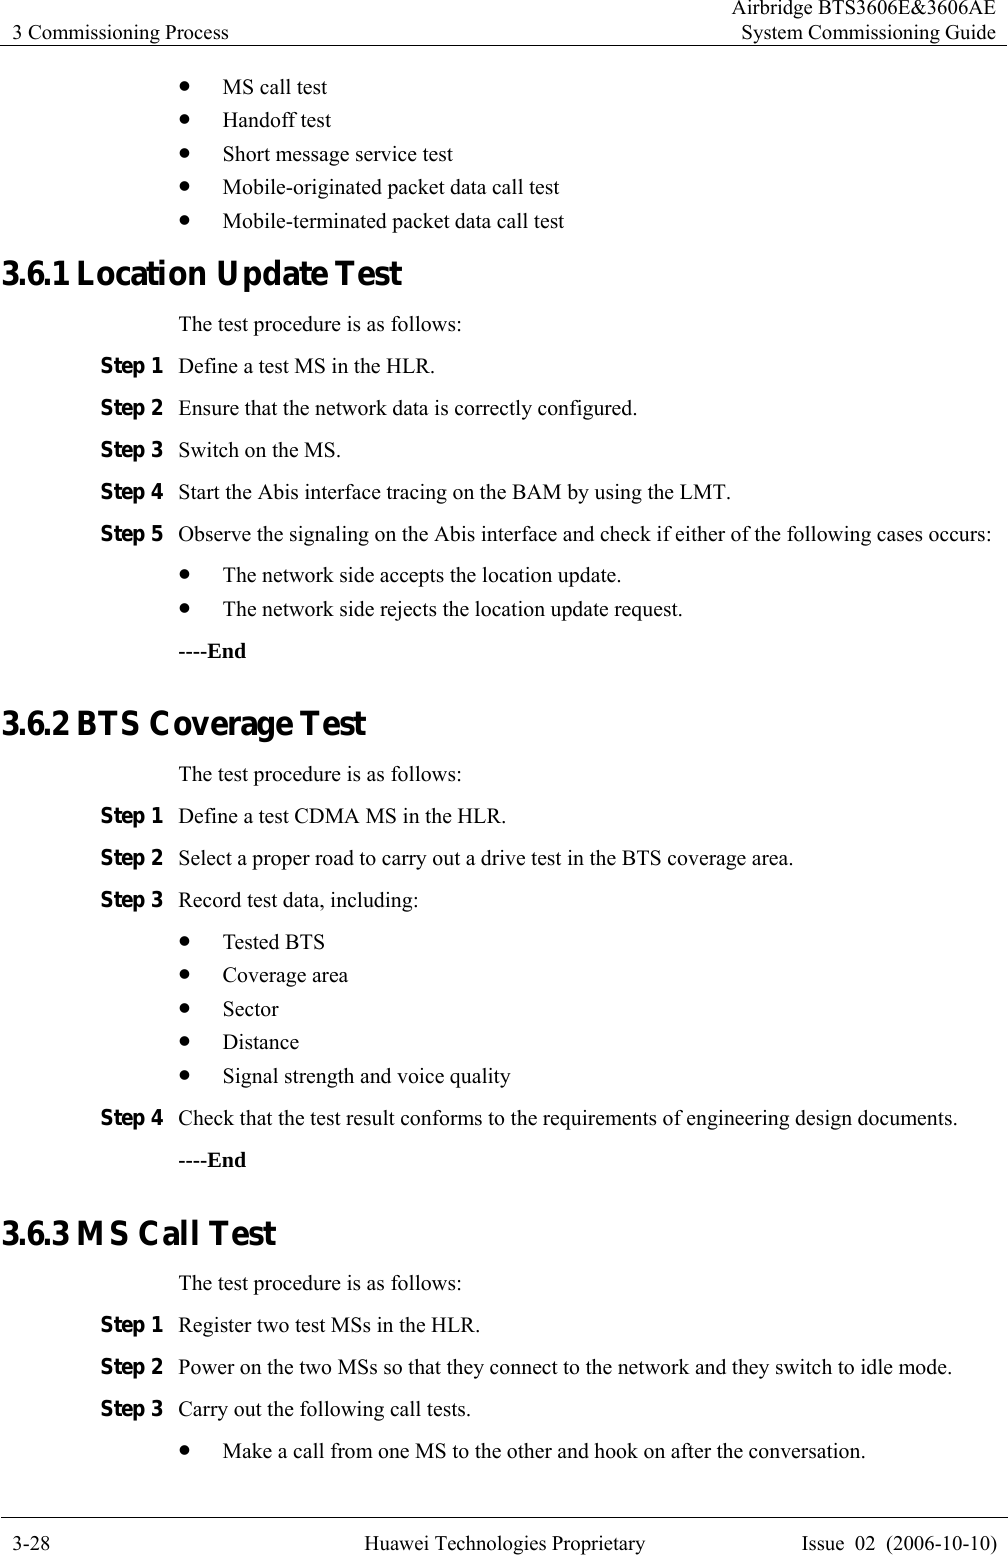 3 Commissioning Process Airbridge BTS3606E&amp;3606AESystem Commissioning Guide 3-28  Huawei Technologies Proprietary  Issue  02  (2006-10-10) z MS call test z Handoff test z Short message service test z Mobile-originated packet data call test z Mobile-terminated packet data call test 3.6.1 Location Update Test The test procedure is as follows: Step 1 Define a test MS in the HLR. Step 2 Ensure that the network data is correctly configured. Step 3 Switch on the MS. Step 4 Start the Abis interface tracing on the BAM by using the LMT.   Step 5 Observe the signaling on the Abis interface and check if either of the following cases occurs: z The network side accepts the location update. z The network side rejects the location update request. ----End 3.6.2 BTS Coverage Test The test procedure is as follows: Step 1 Define a test CDMA MS in the HLR. Step 2 Select a proper road to carry out a drive test in the BTS coverage area. Step 3 Record test data, including:   z Tested BTS z Coverage area z Sector z Distance z Signal strength and voice quality Step 4 Check that the test result conforms to the requirements of engineering design documents. ----End 3.6.3 MS Call Test The test procedure is as follows: Step 1 Register two test MSs in the HLR. Step 2 Power on the two MSs so that they connect to the network and they switch to idle mode. Step 3 Carry out the following call tests. z Make a call from one MS to the other and hook on after the conversation. 